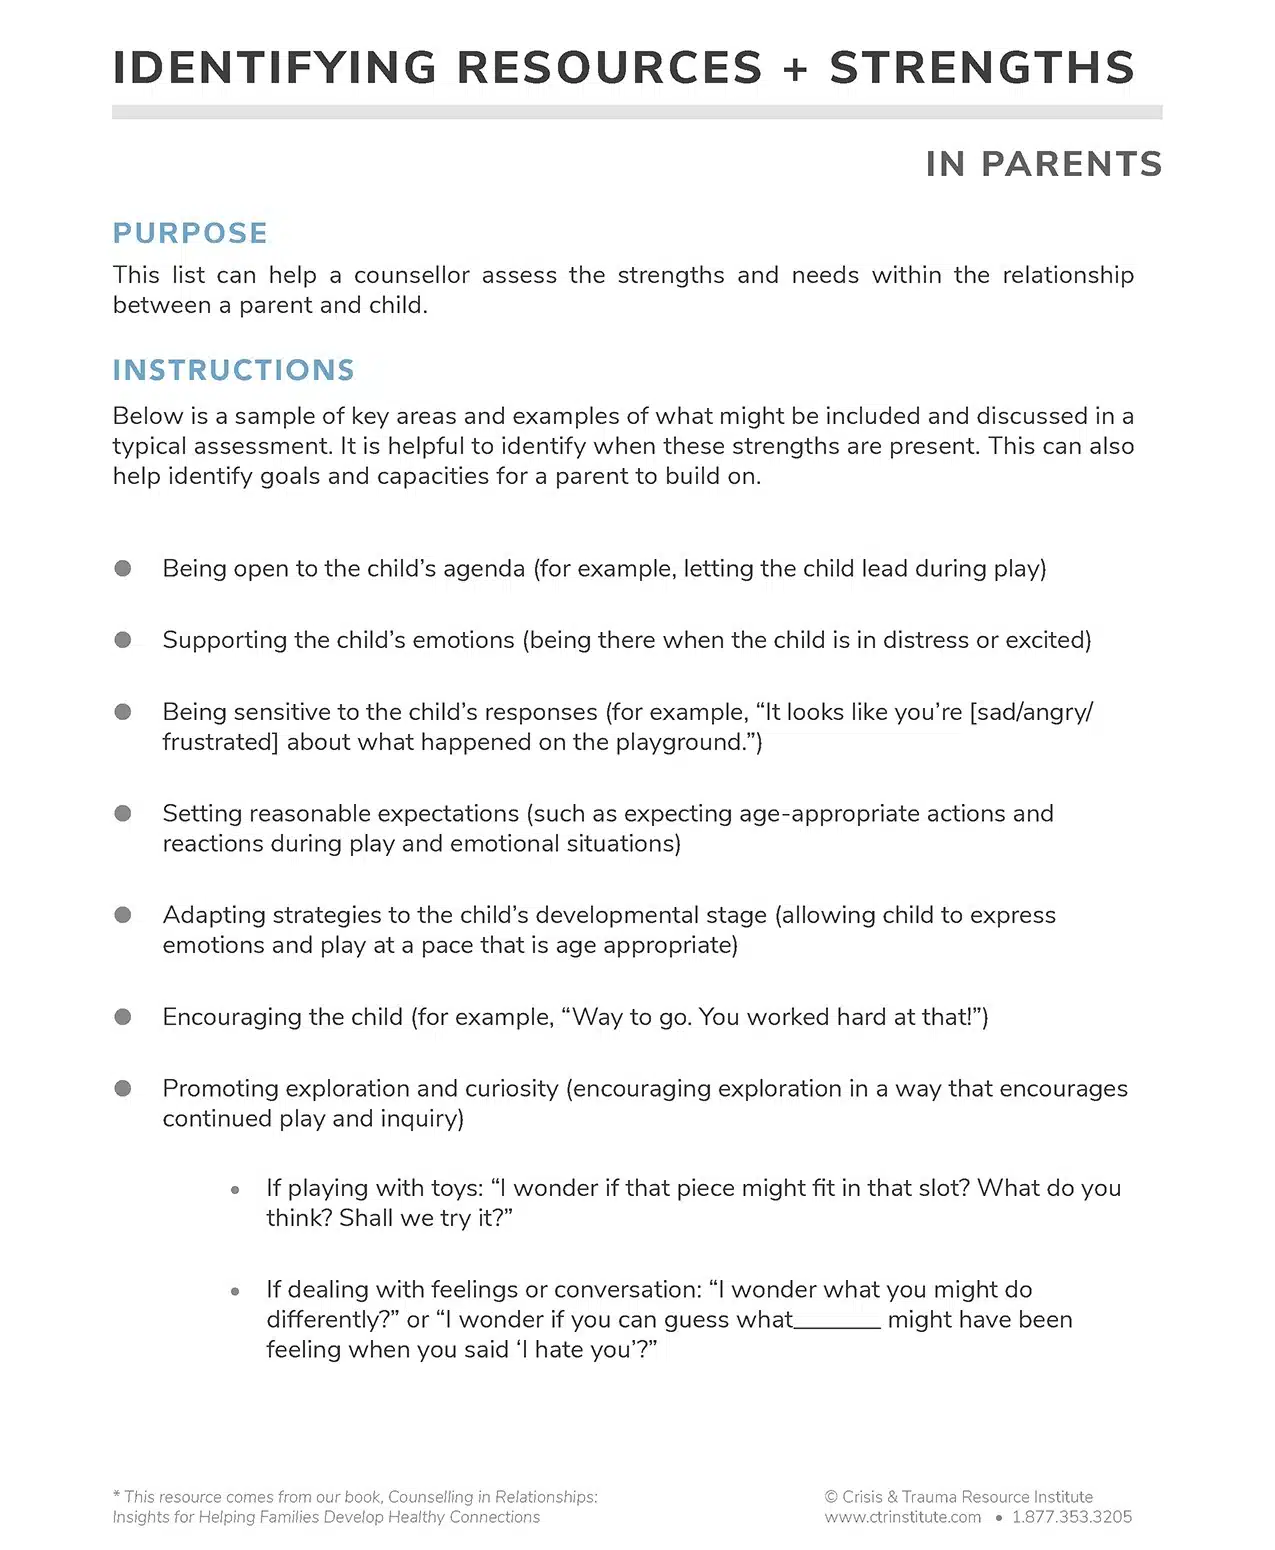 Image of Free Printable Handout Identifying Resources and Strengths in Parents